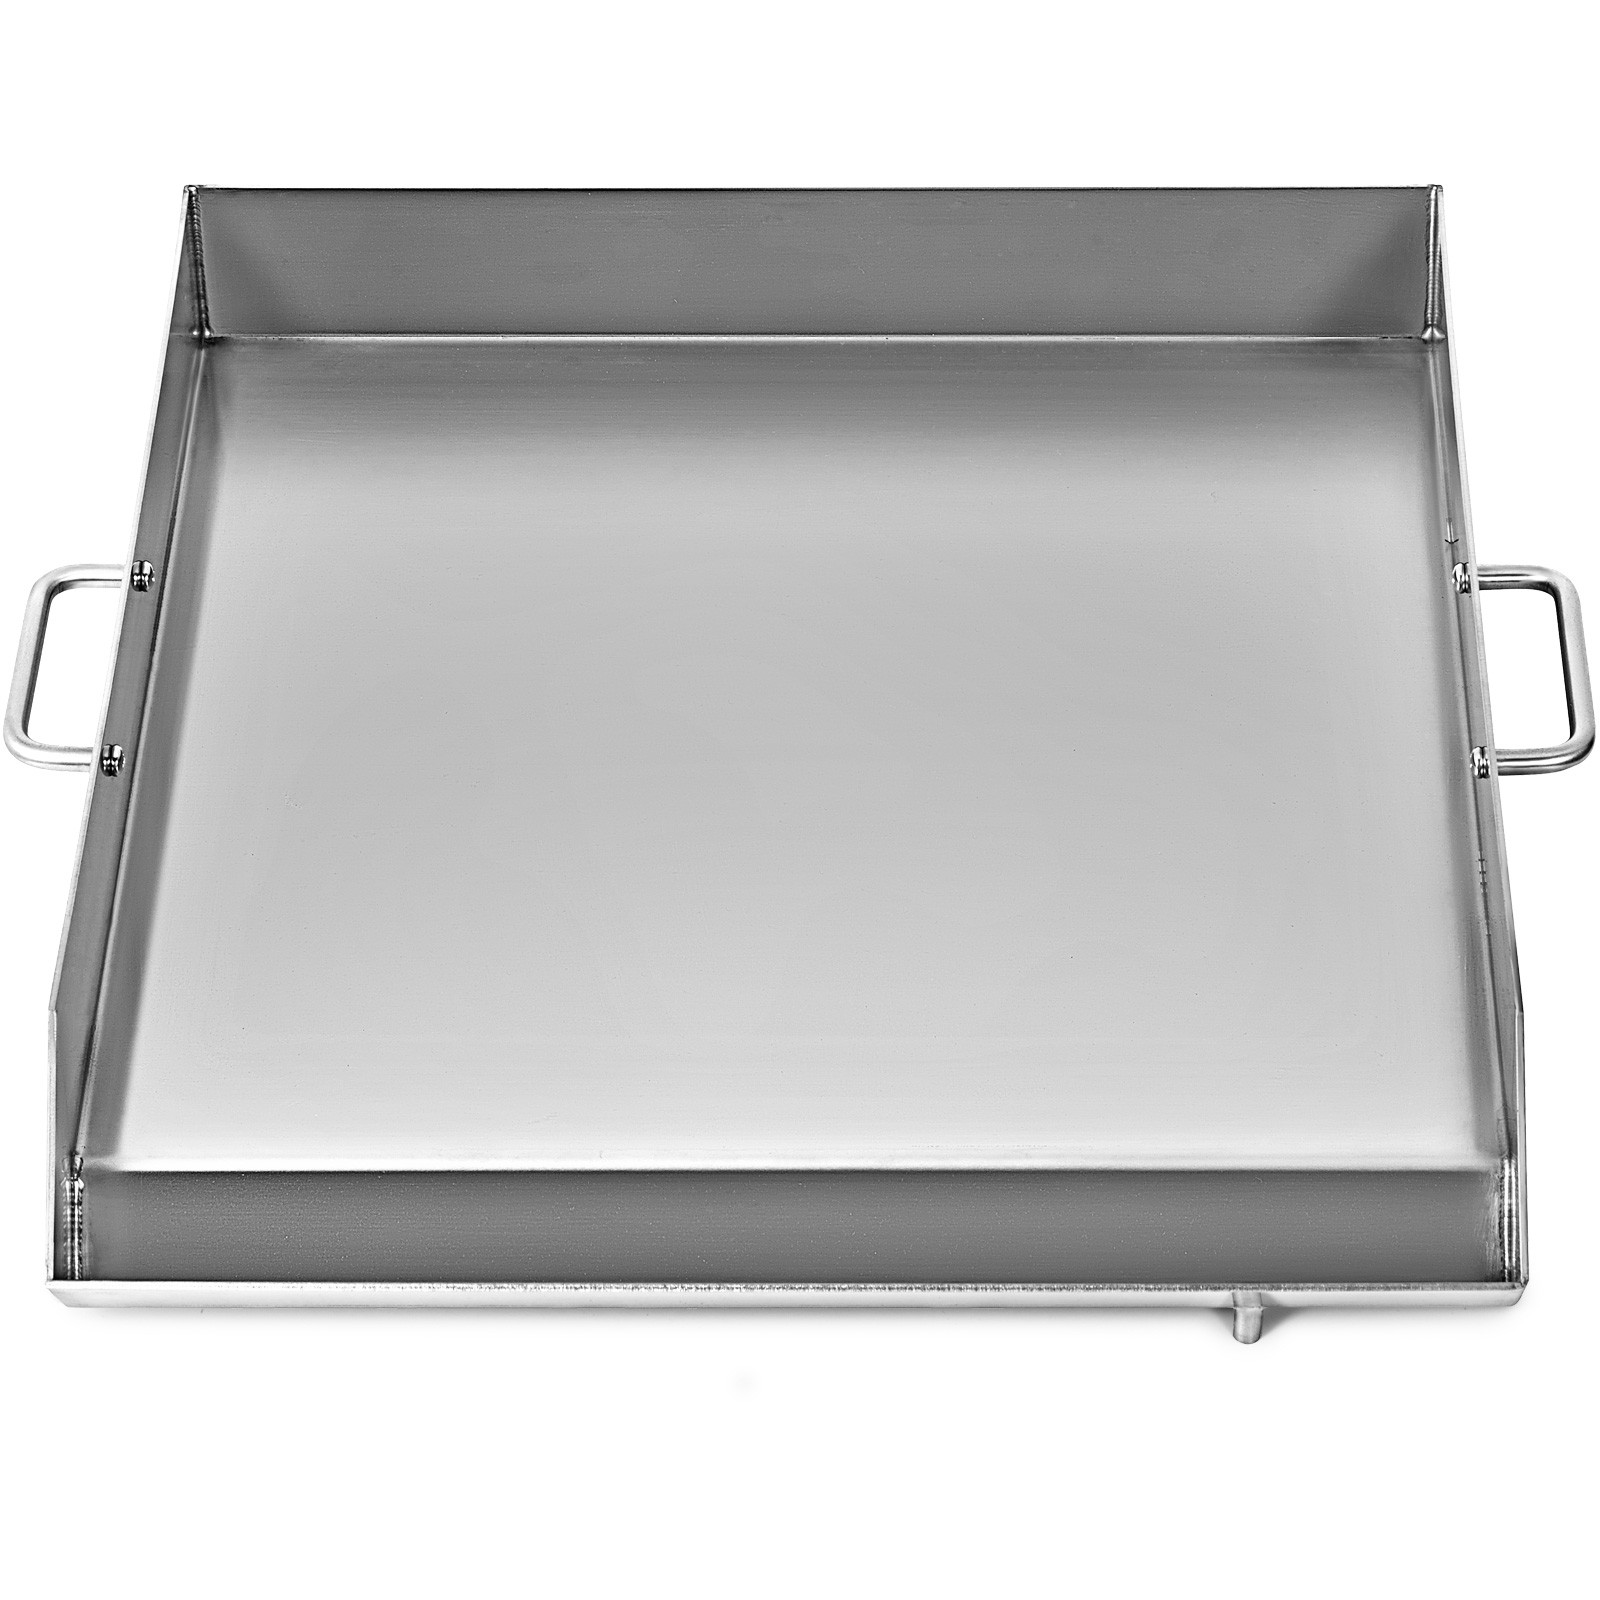 grill pro stainless steel griddle